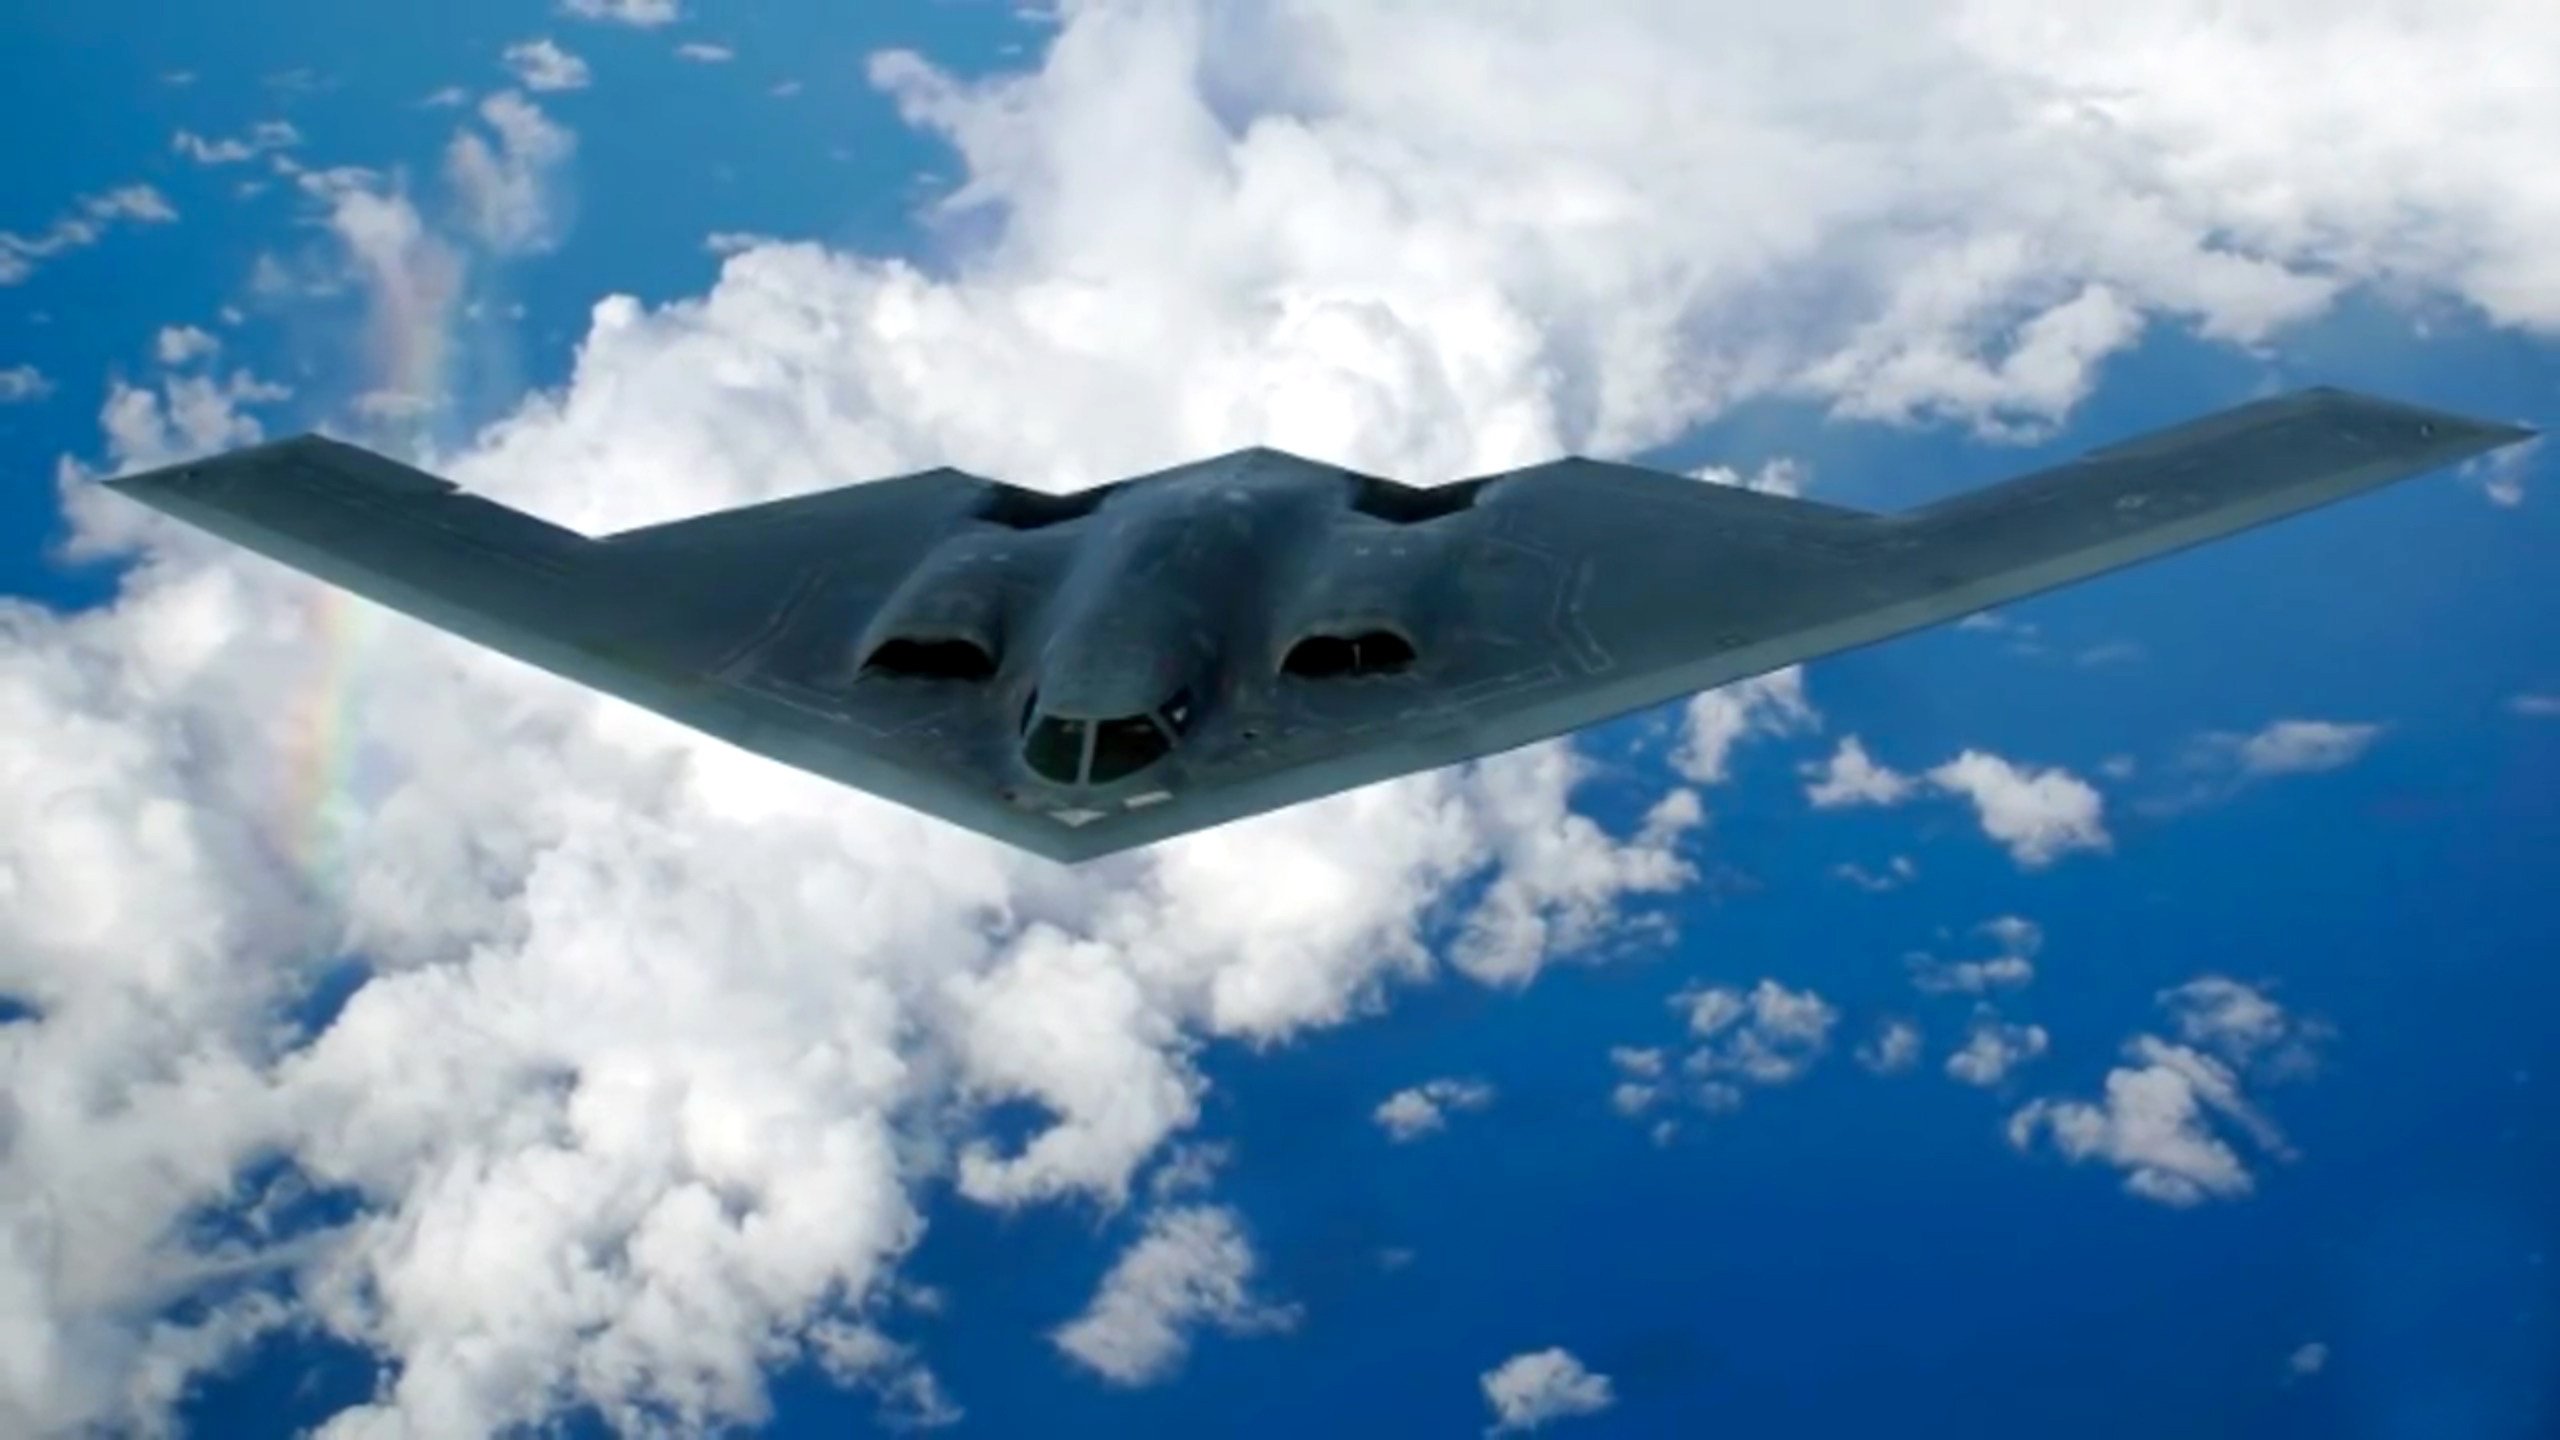 The B-21 Raider is a long-range, stealth strategic bomber that will soon be rolled out for the United States Air Force. Photo: Handout